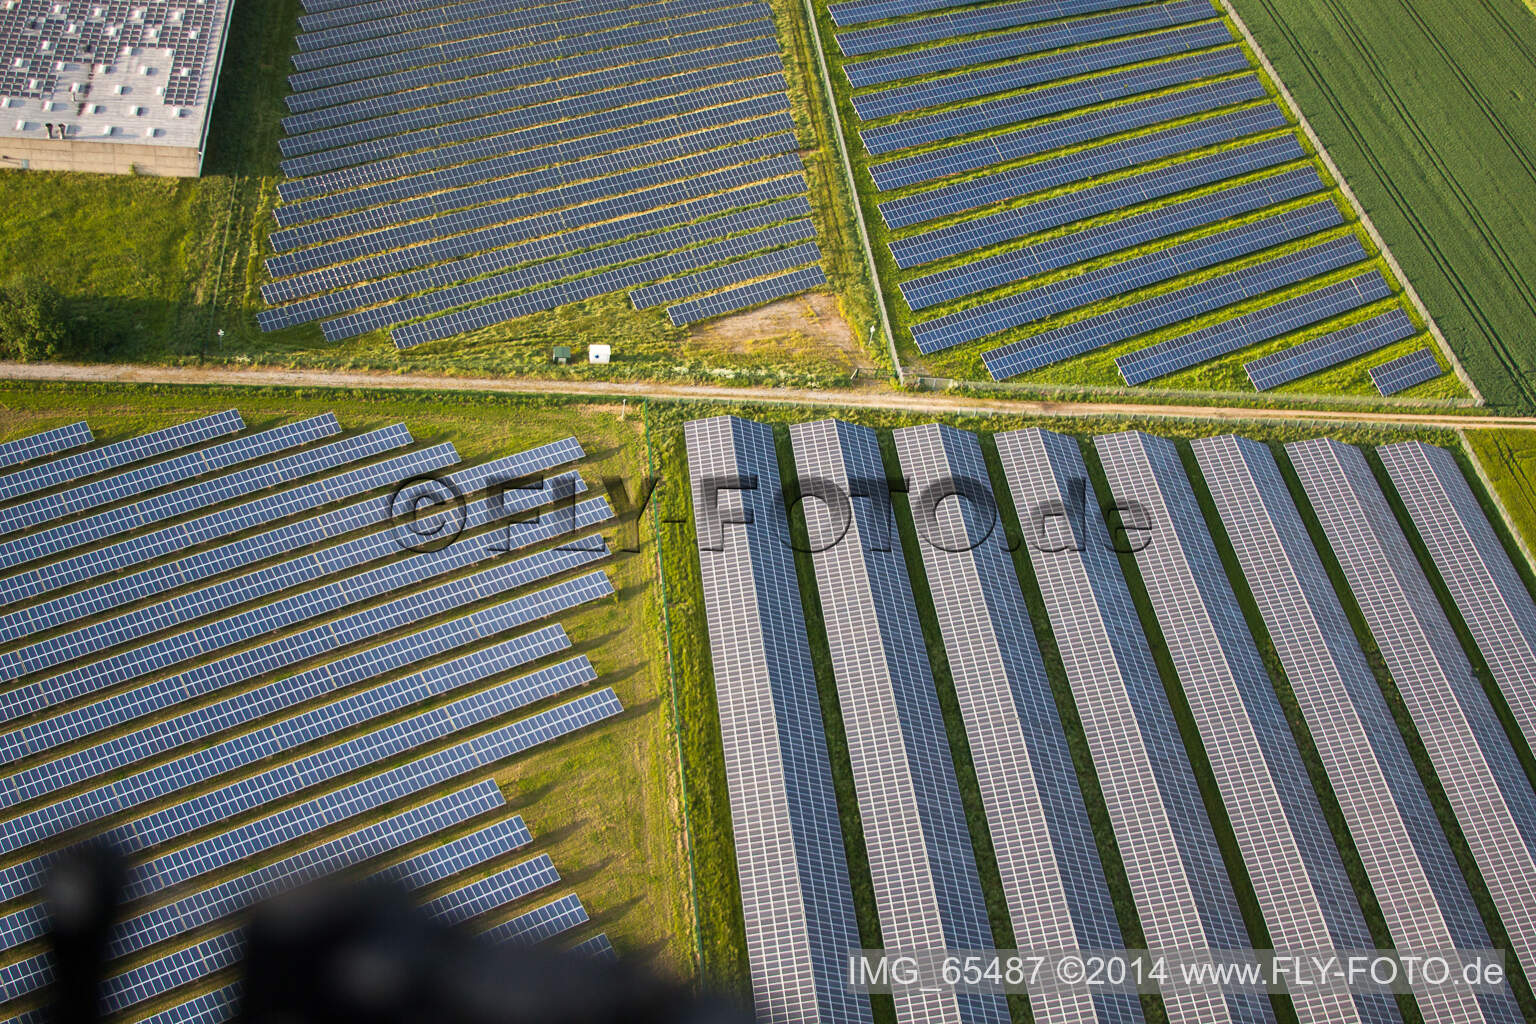 Oblique view of Panel rows of photovoltaic and solar farm or solar power plant in the district Bredenborn in Marienmuenster in the state North Rhine-Westphalia